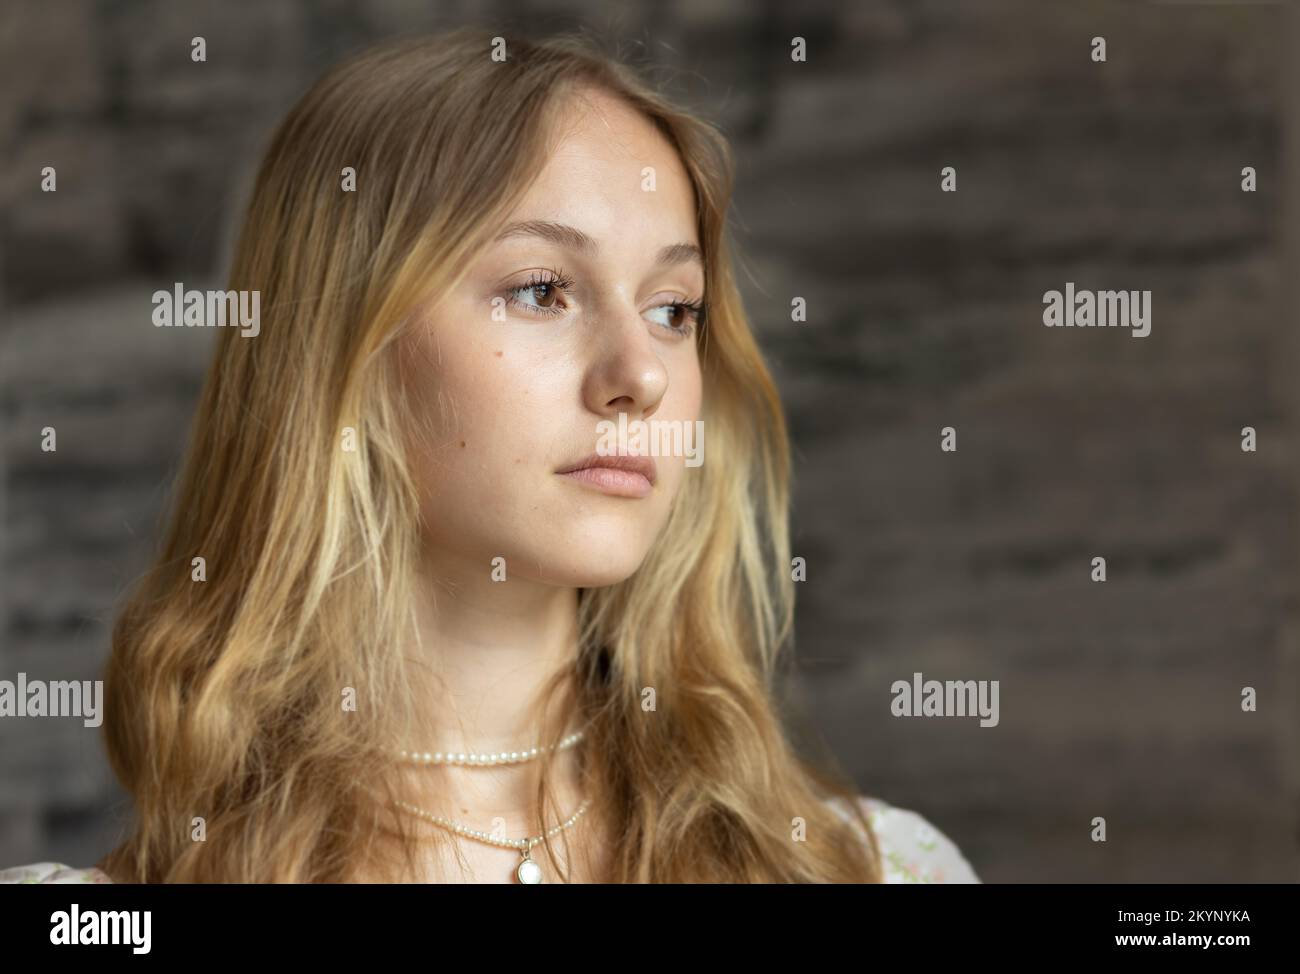 Studio portrait of a long-haired young blonde woman on a dark background Stock Photo